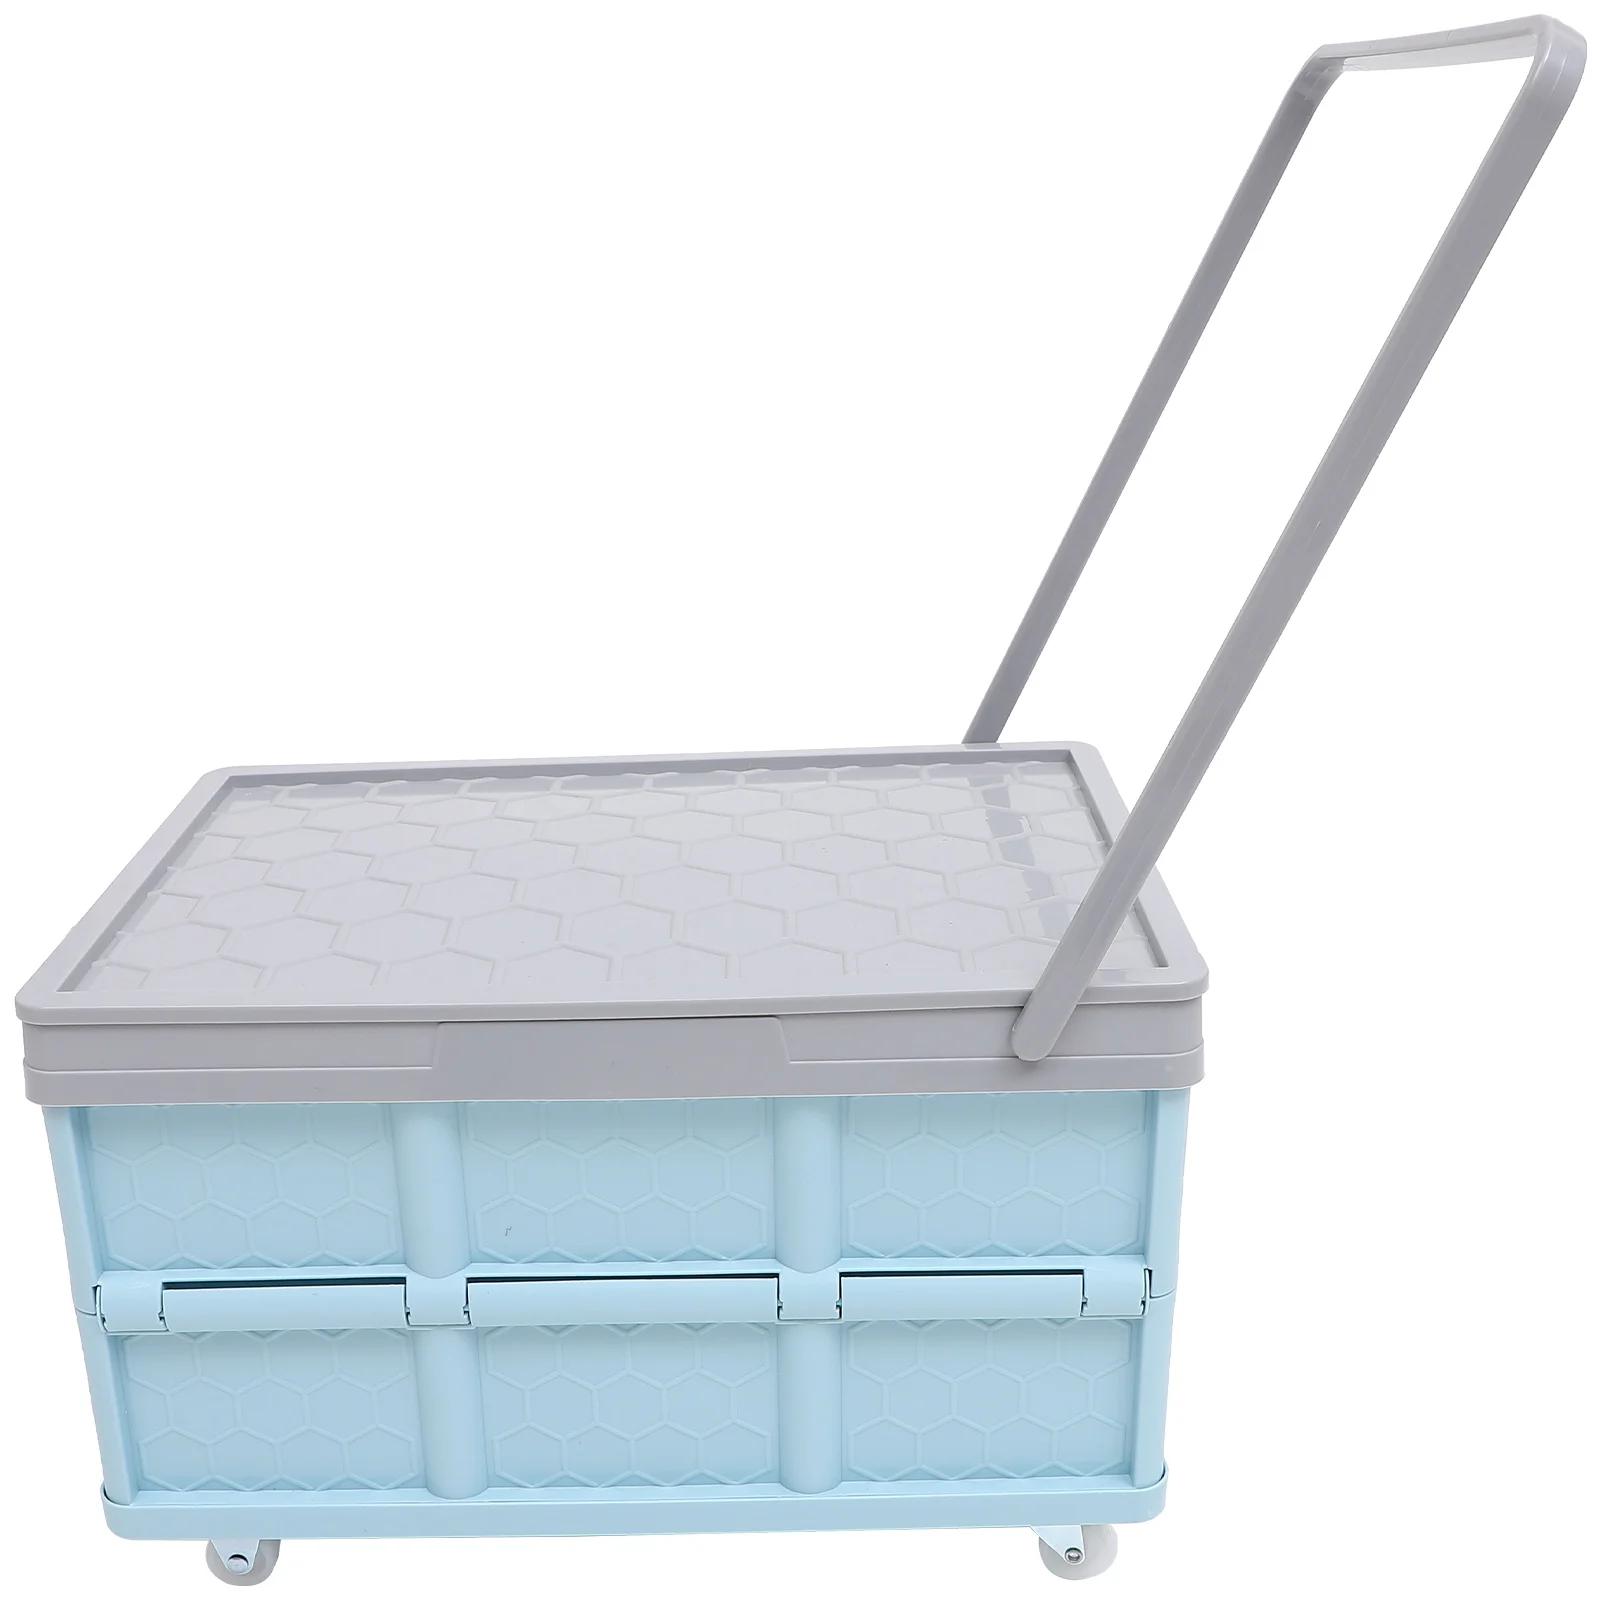 

English title: Alipis Collapsible Rolling Crate Wheels Foldable Utility Cart Handcart Shopping Trolley Travel Shopping Moving